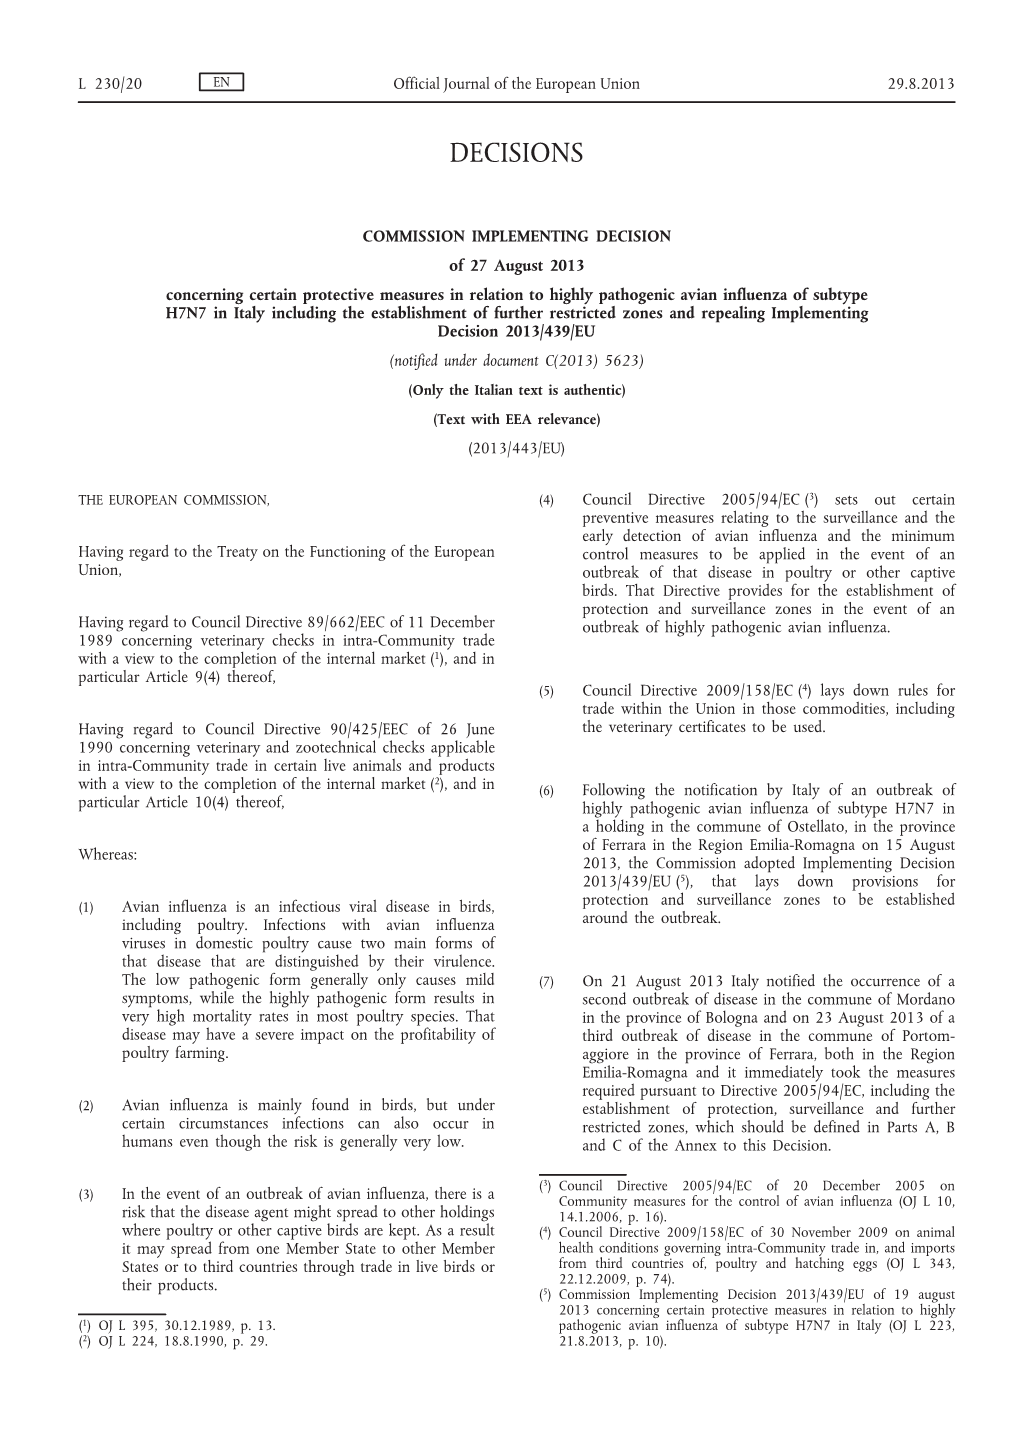 Commission Implementing Decision of 27 August 2013 Concerning Certain